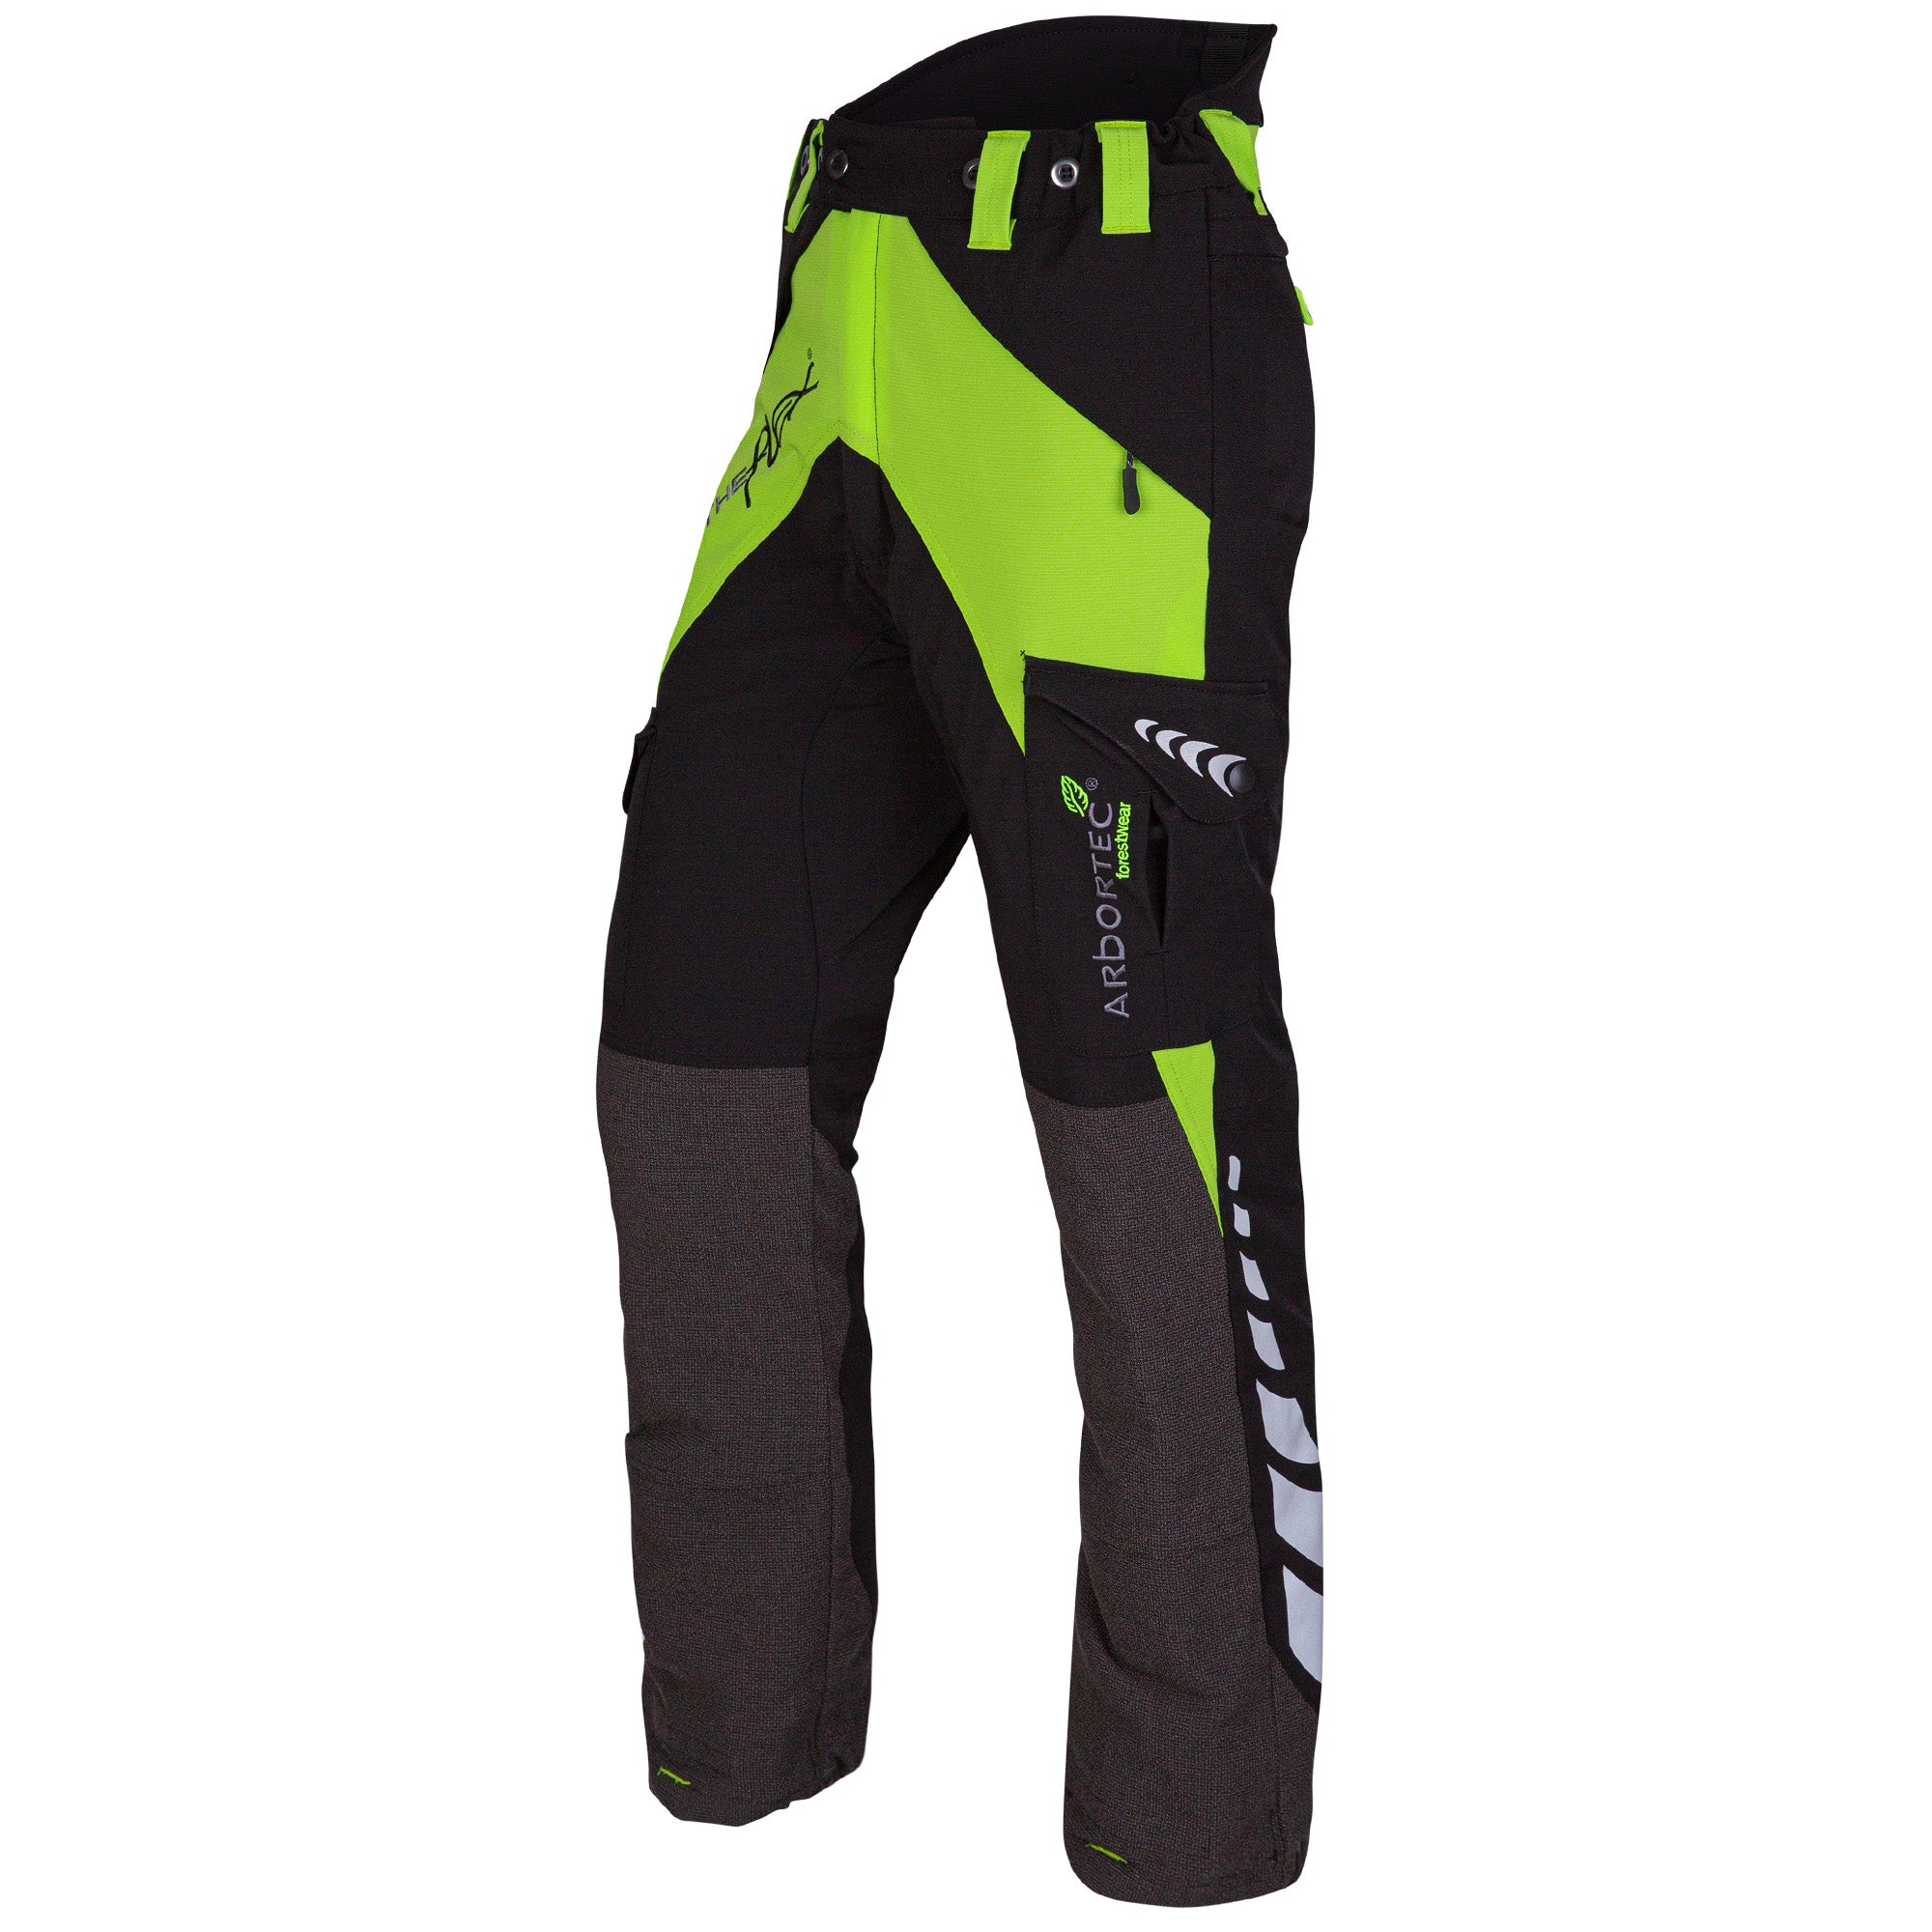 AT4050(F) Breatheflex Chainsaw Trousers Womens Design C Class 1 - Lime